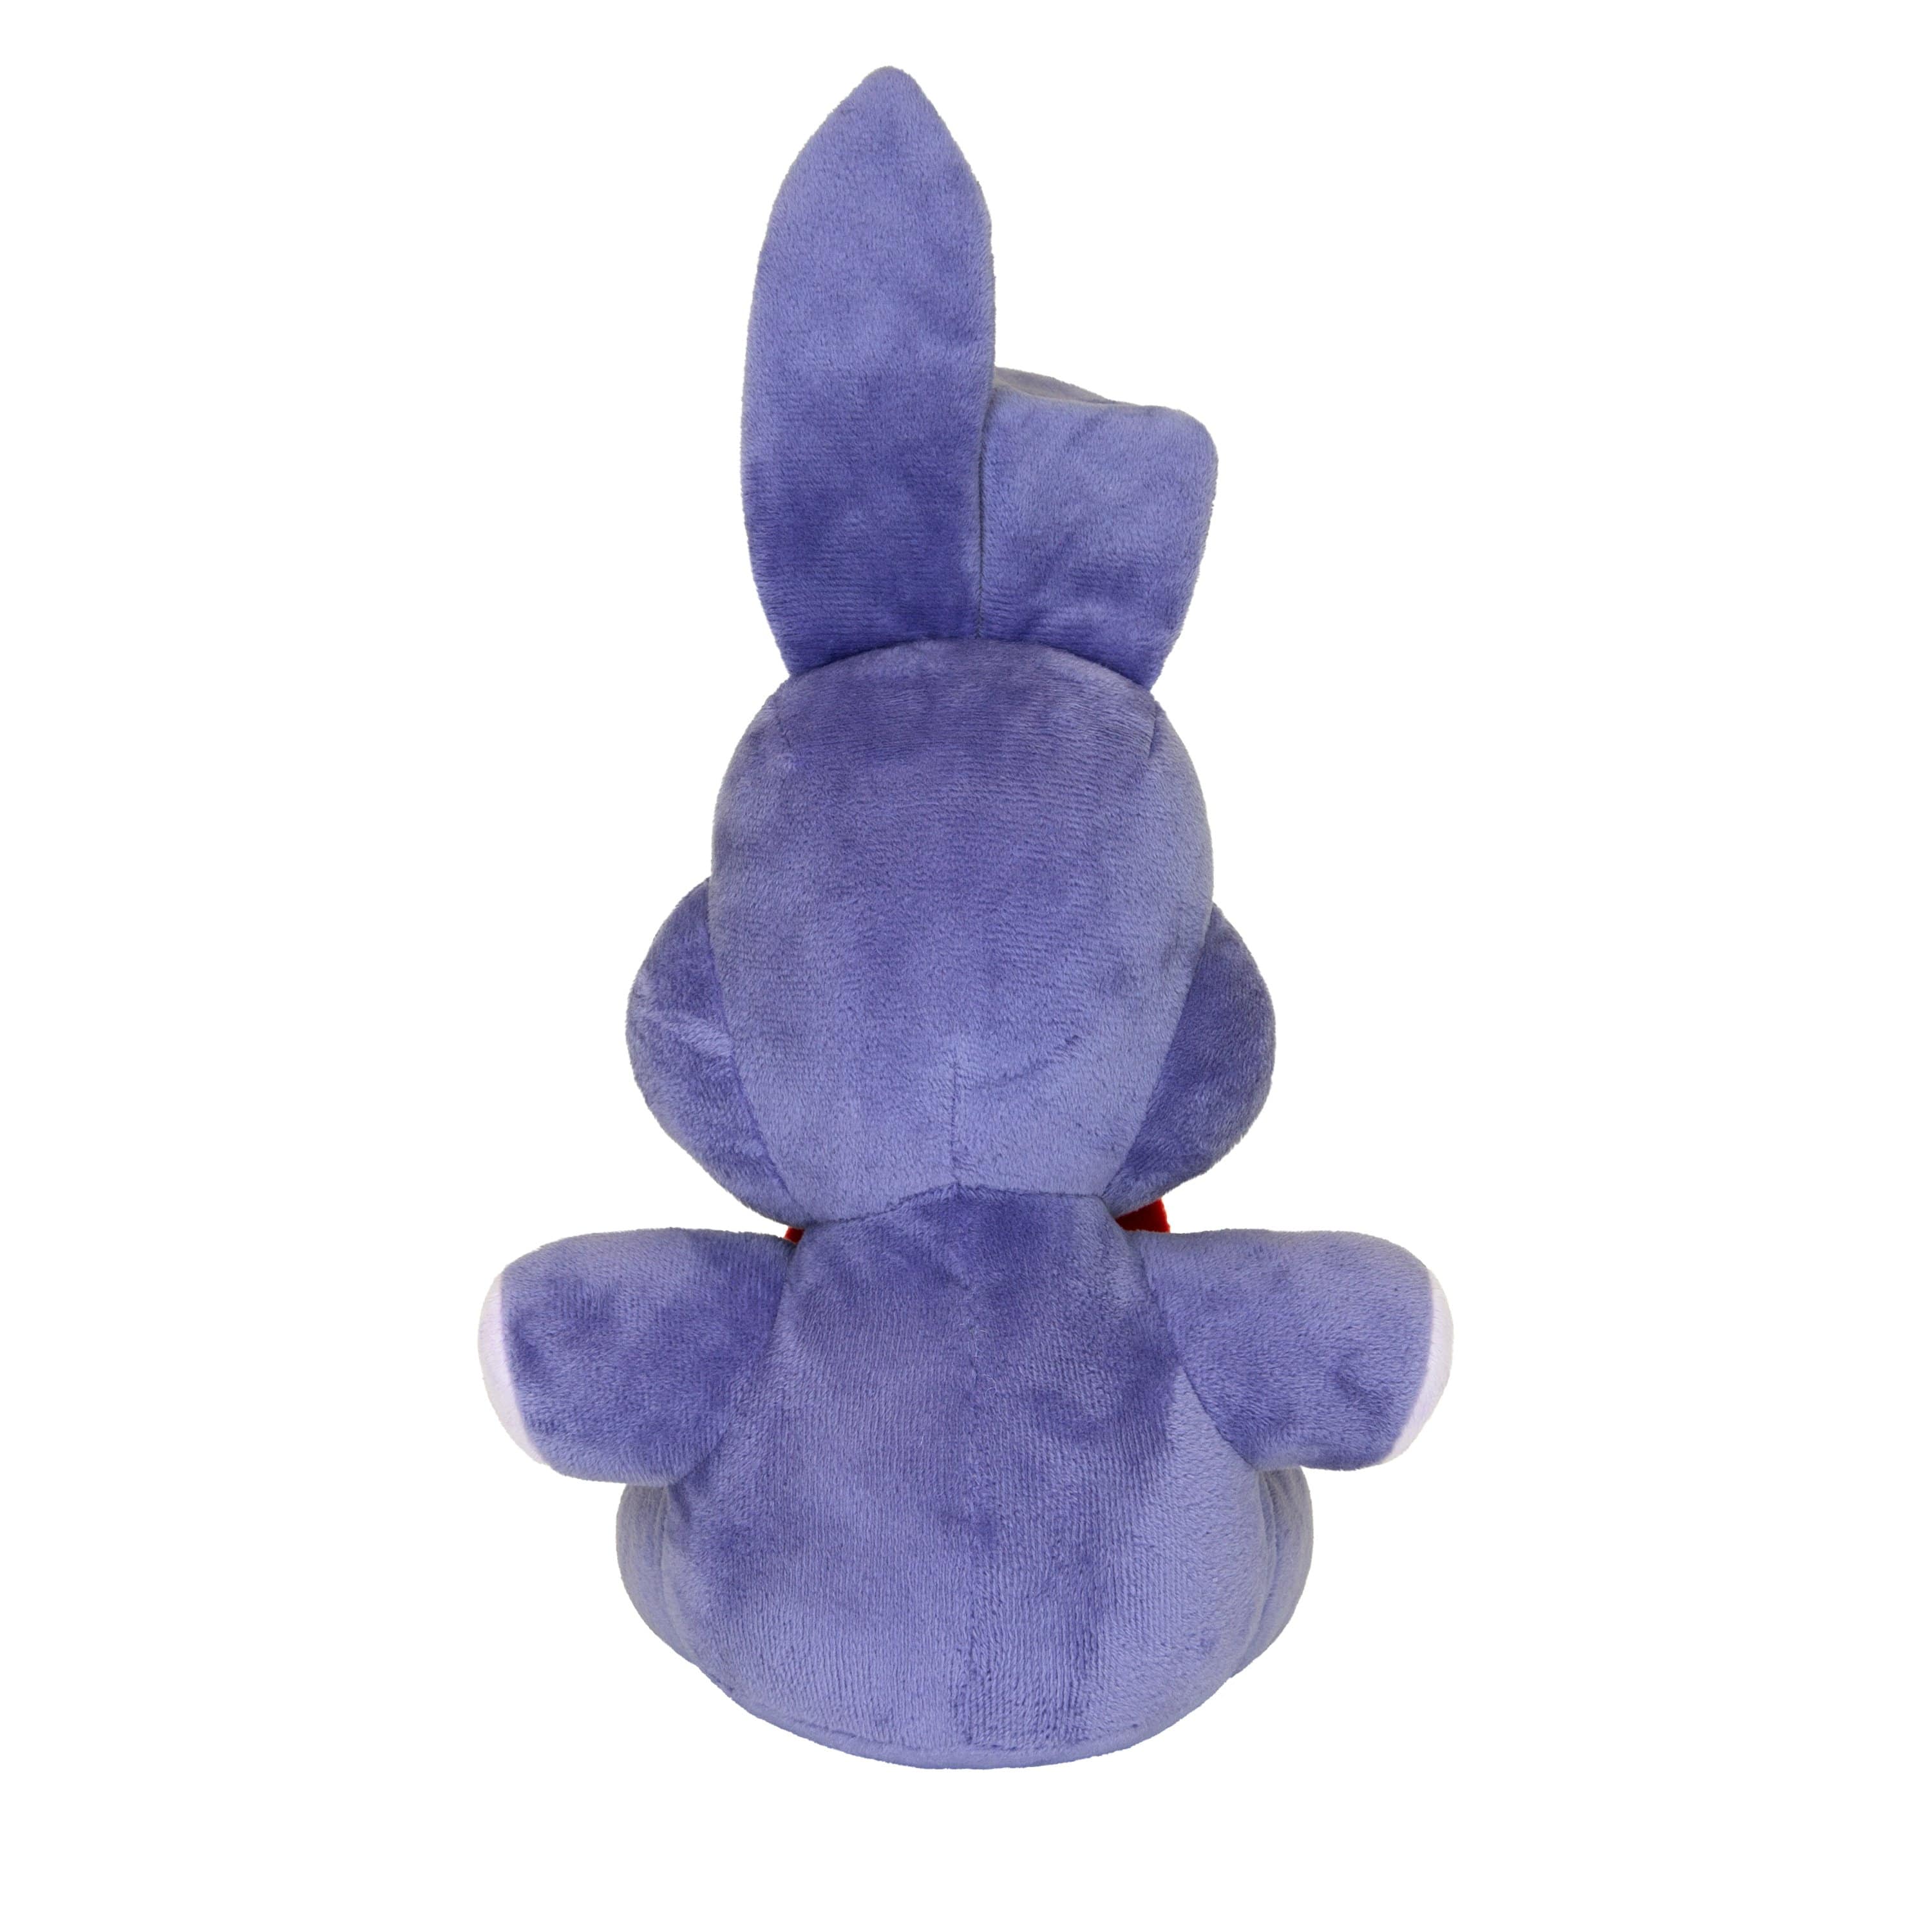 Five Nights At Freddy's Bonnie Collector's Plush Back Photo